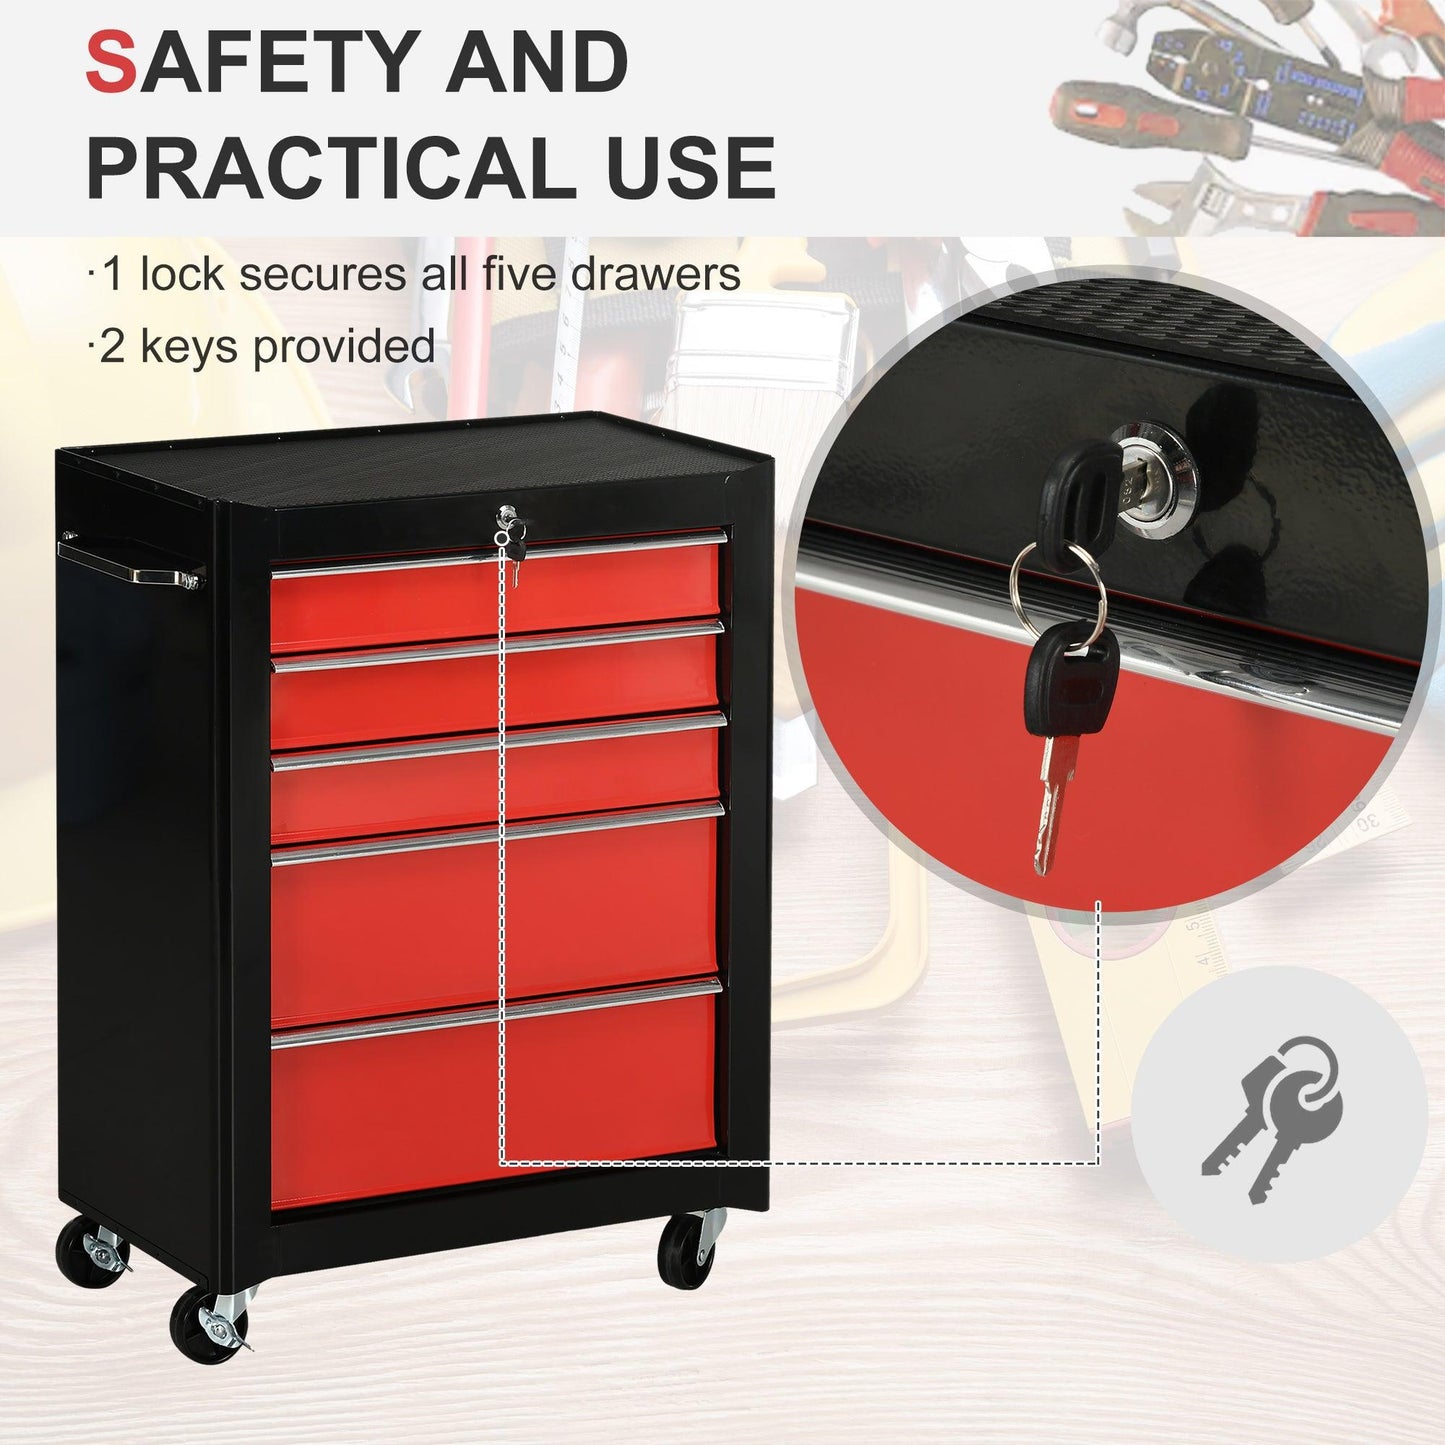 HOMCOM 5-Drawer Tool Chest, Lockable Steel Tool Storage Cabinet with Wheels and Handle Tool Box for Garage, Workshop, Red - ALL4U RETAILER LTD